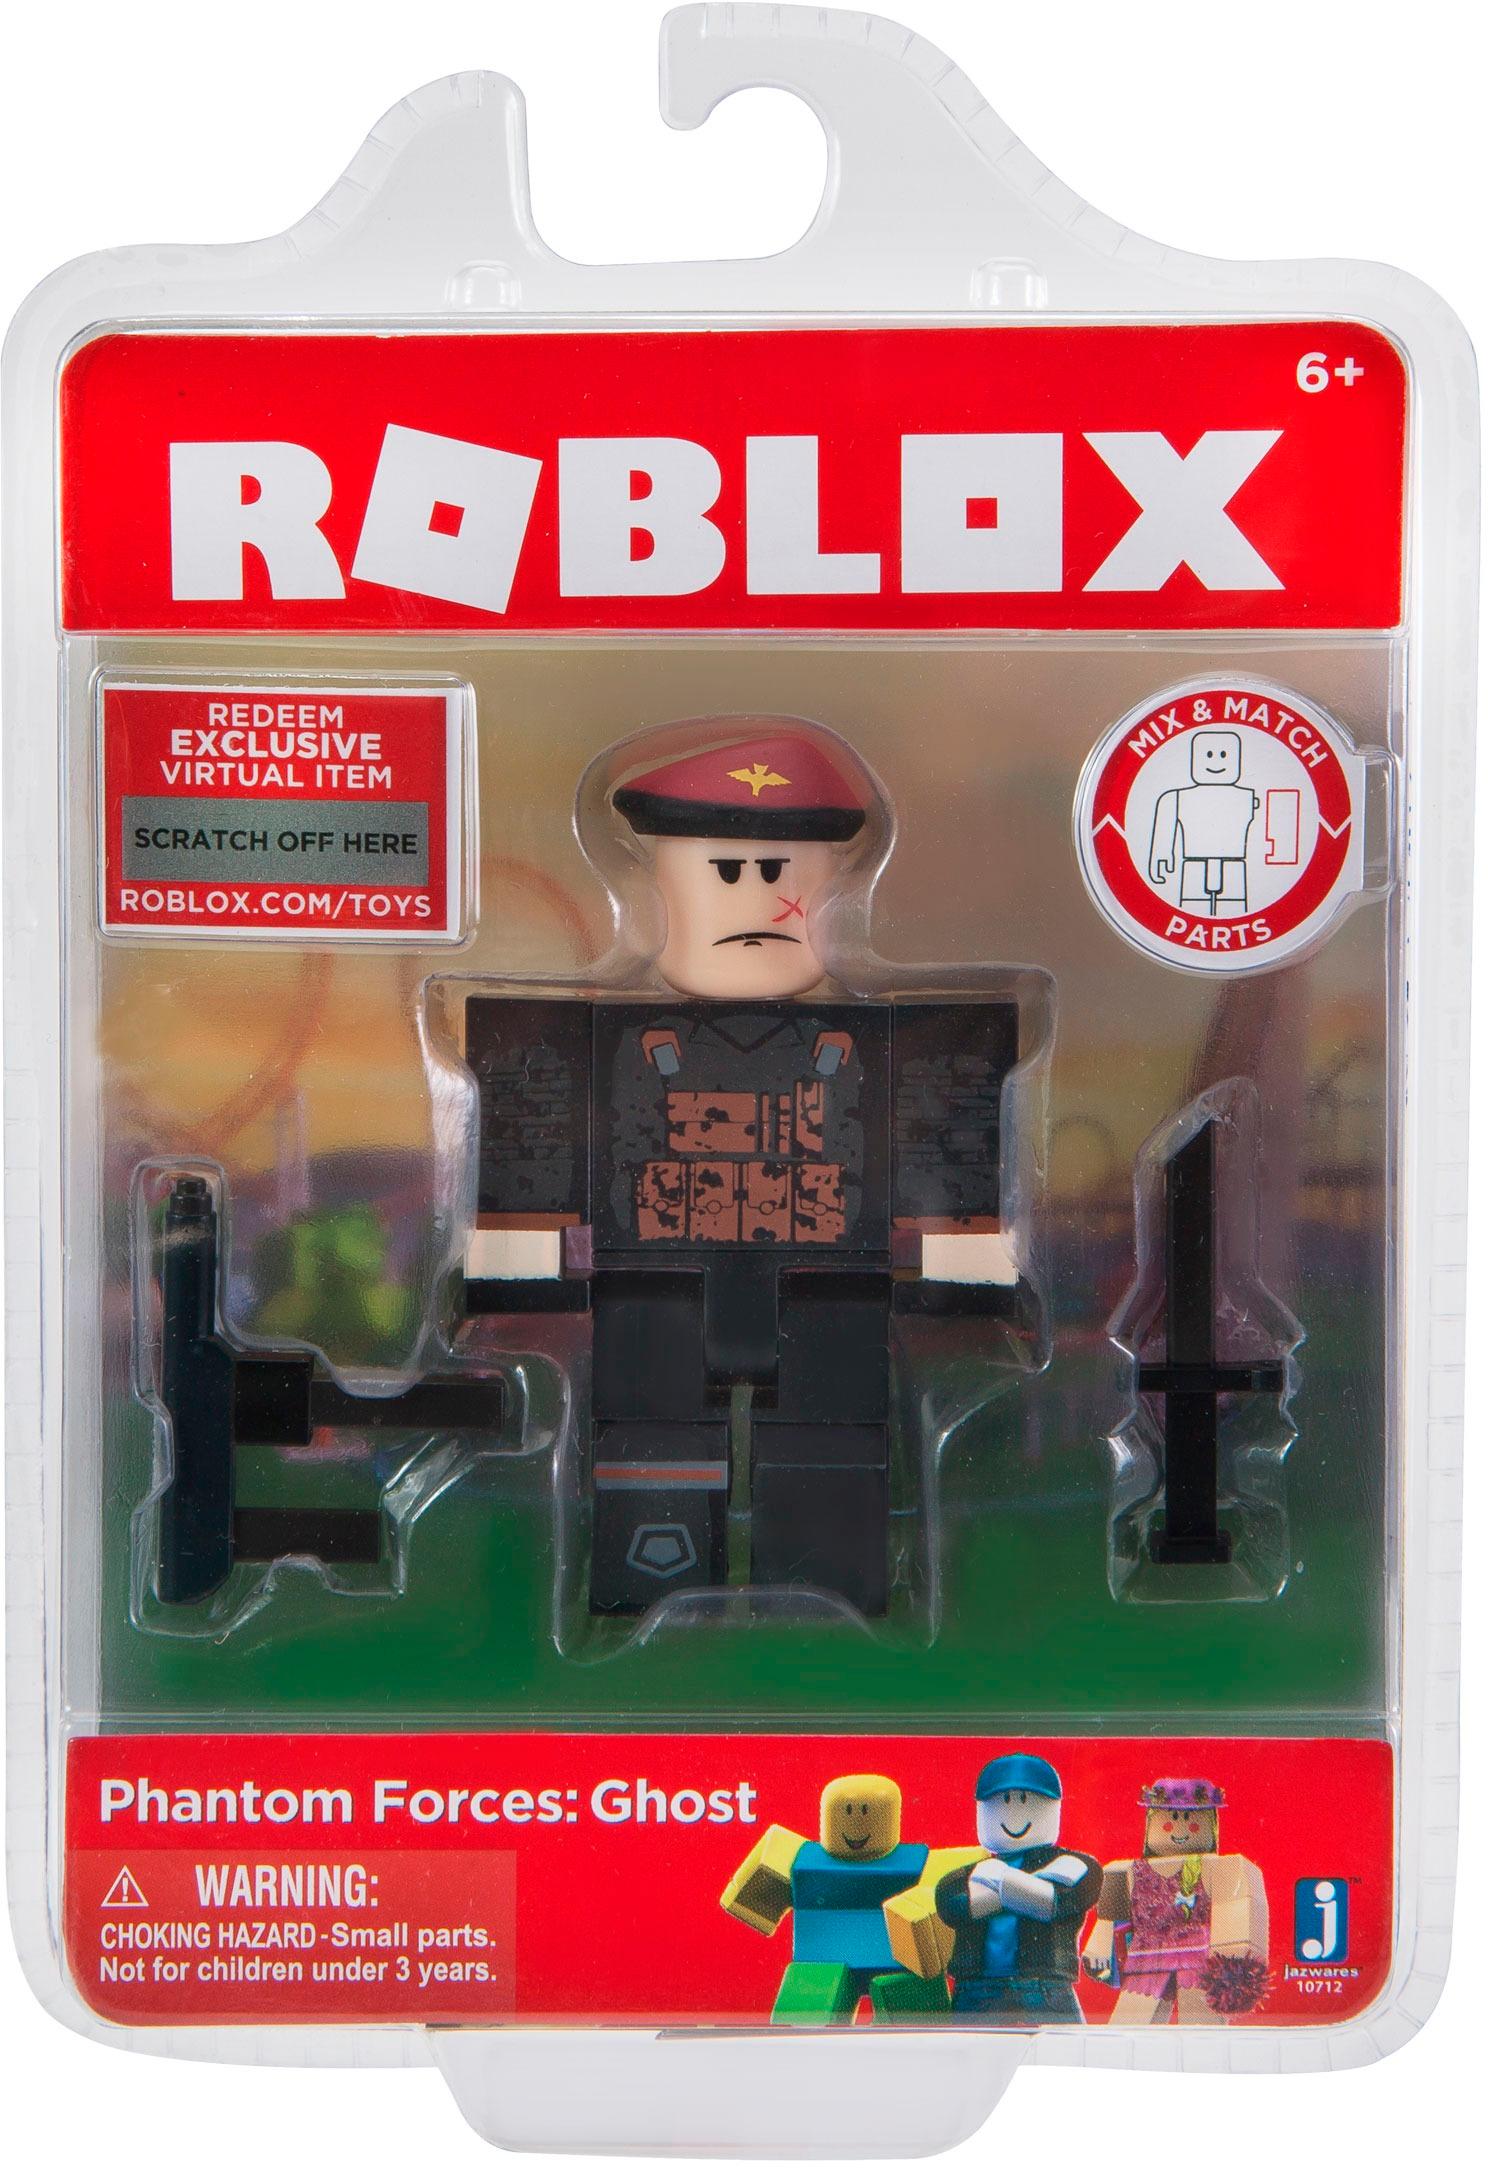 Best Buy Roblox Core Figure Styles May Vary 10705 - redeem exclusive virtual item scratch off hire robloxcomtoys